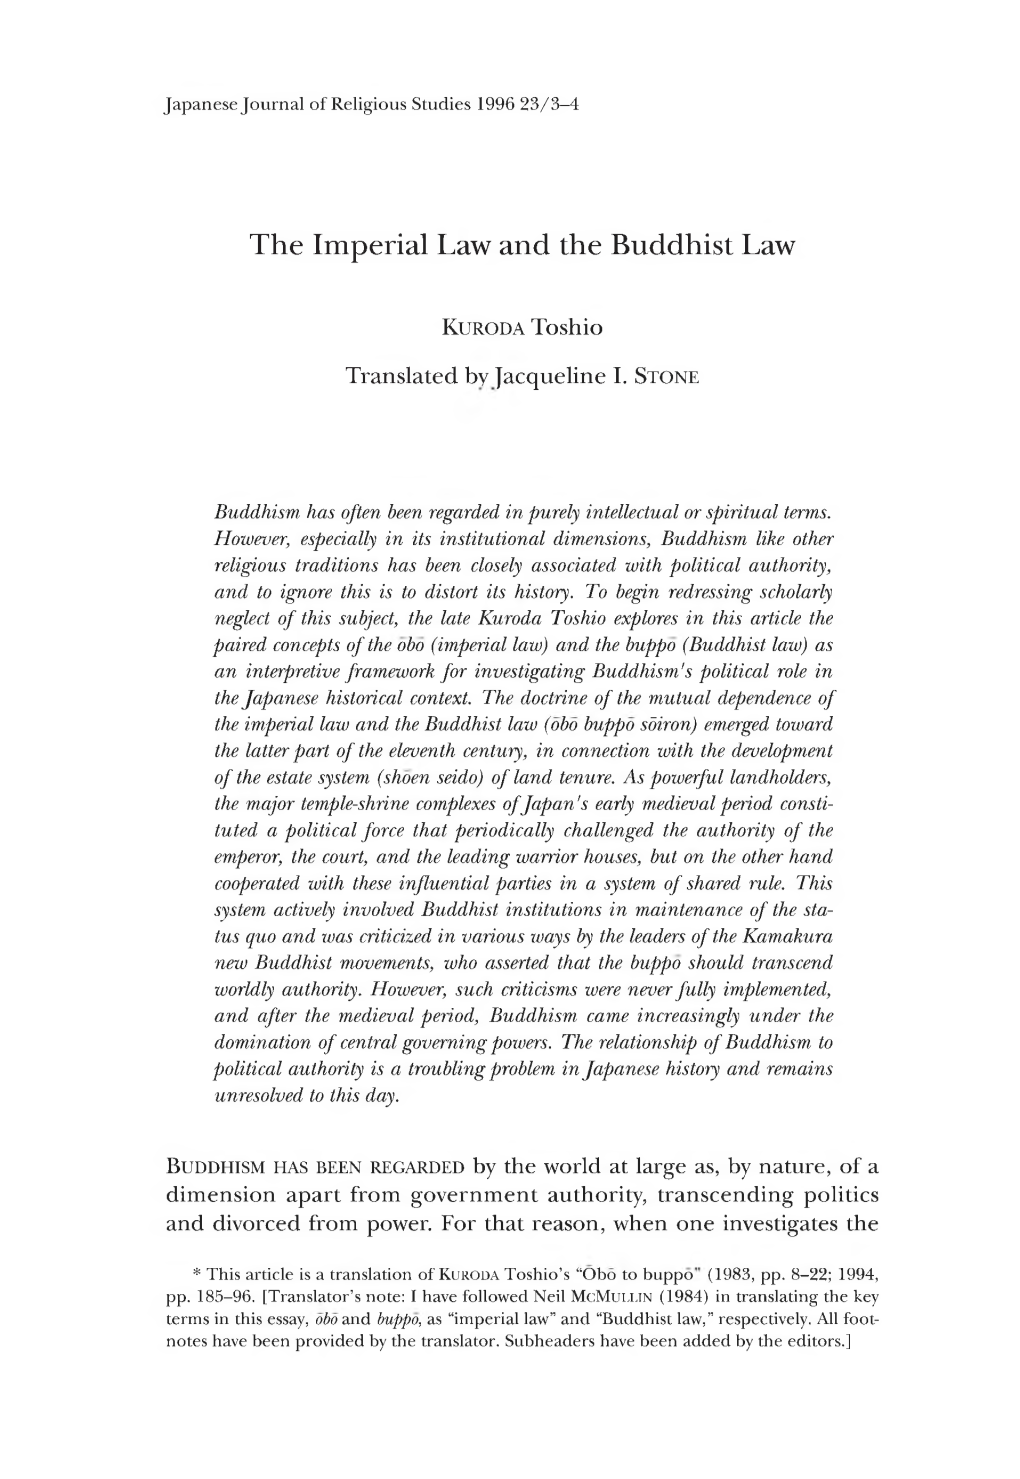 The Imperial Law and the Buddhist Law